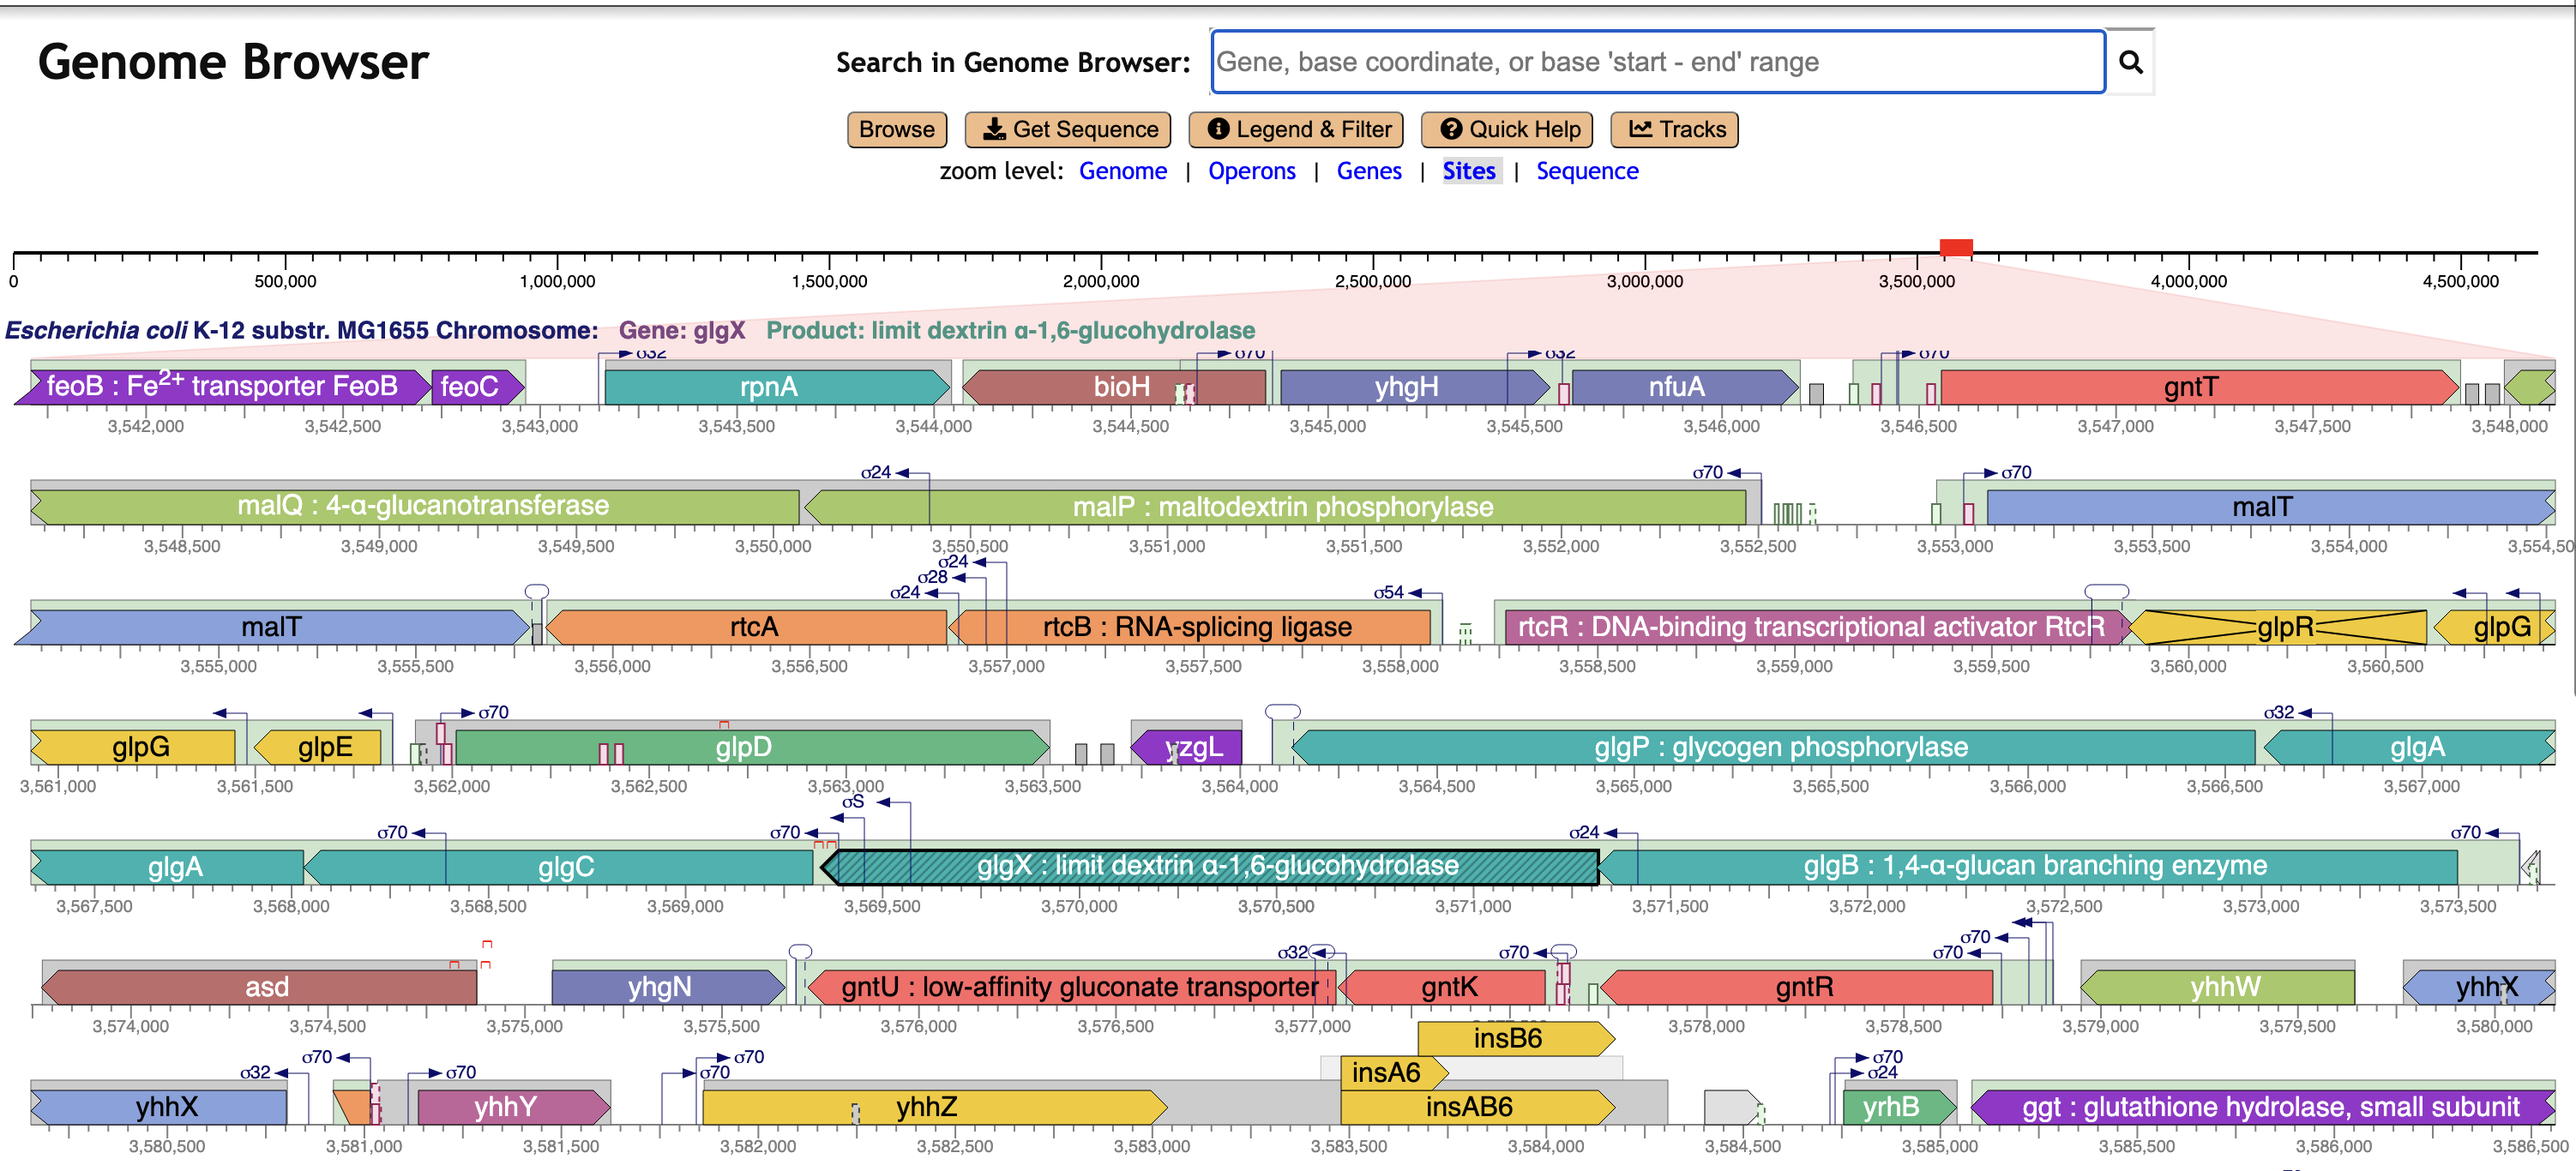 Genome Browser Image